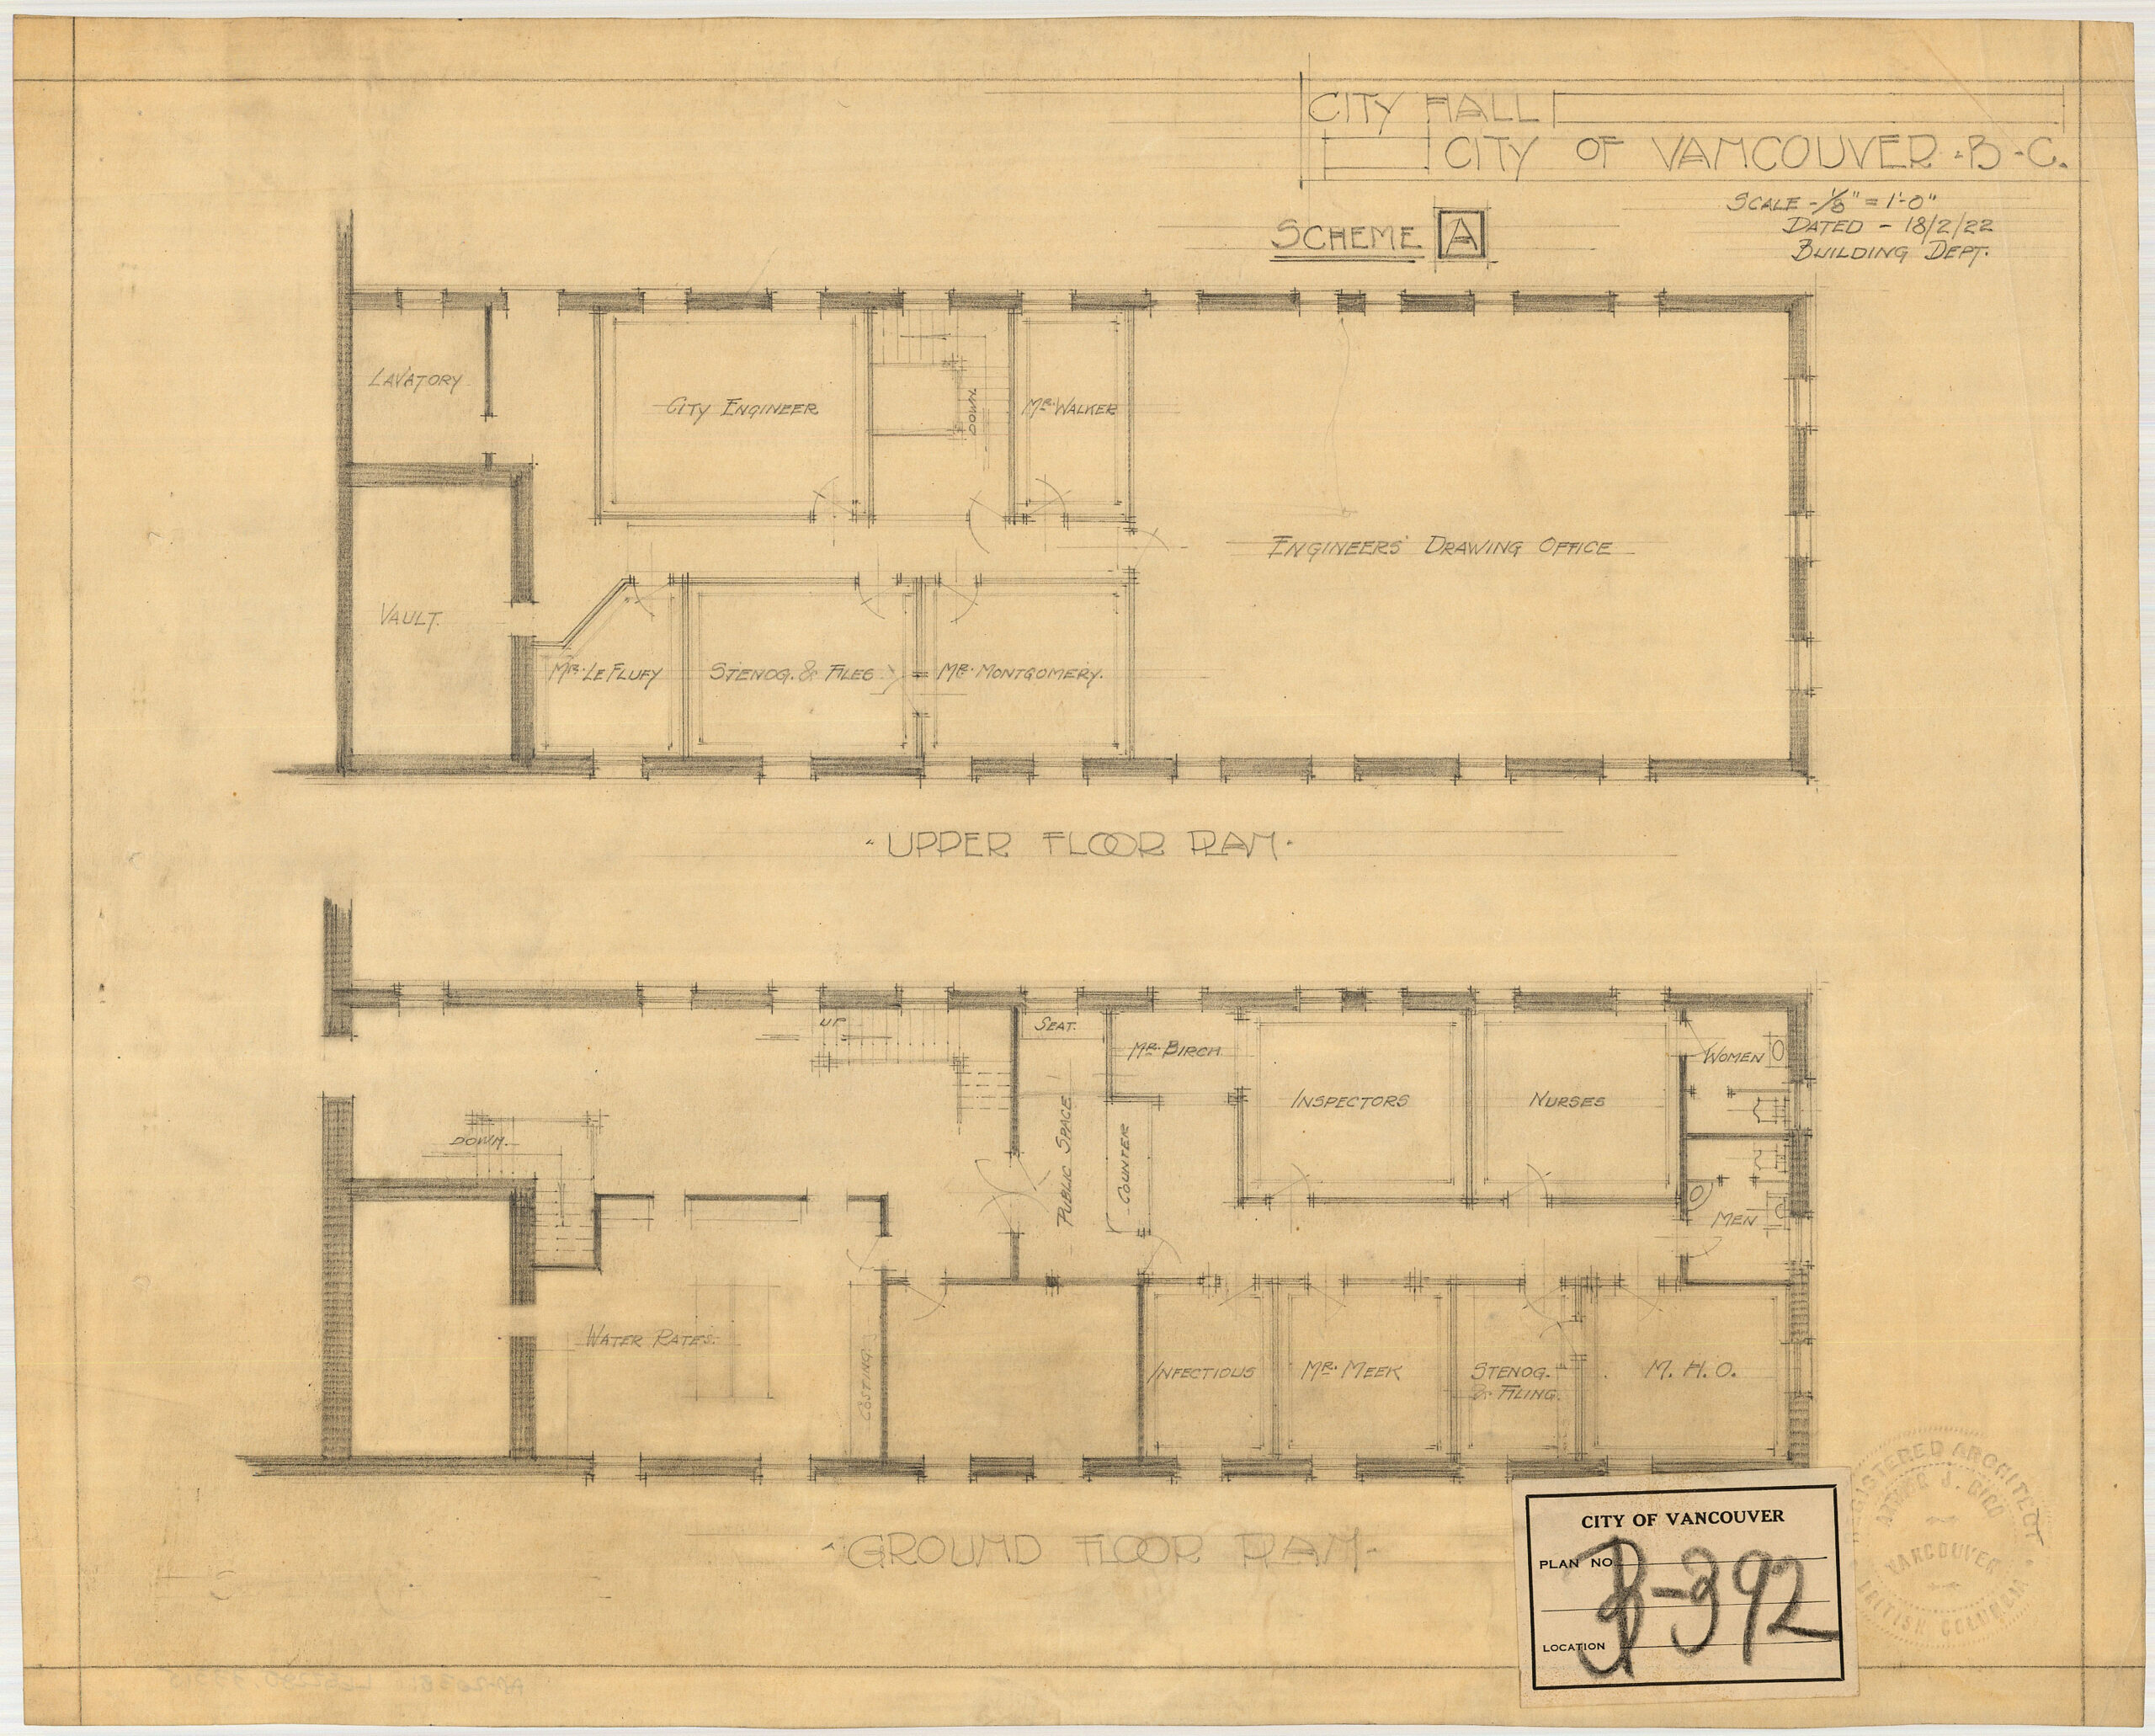 “Old City Hall” Front elevation and floor plan for alterations to make the council chamber. Reference Code: COV-S393-1-AP-2038: LEG2285.33315